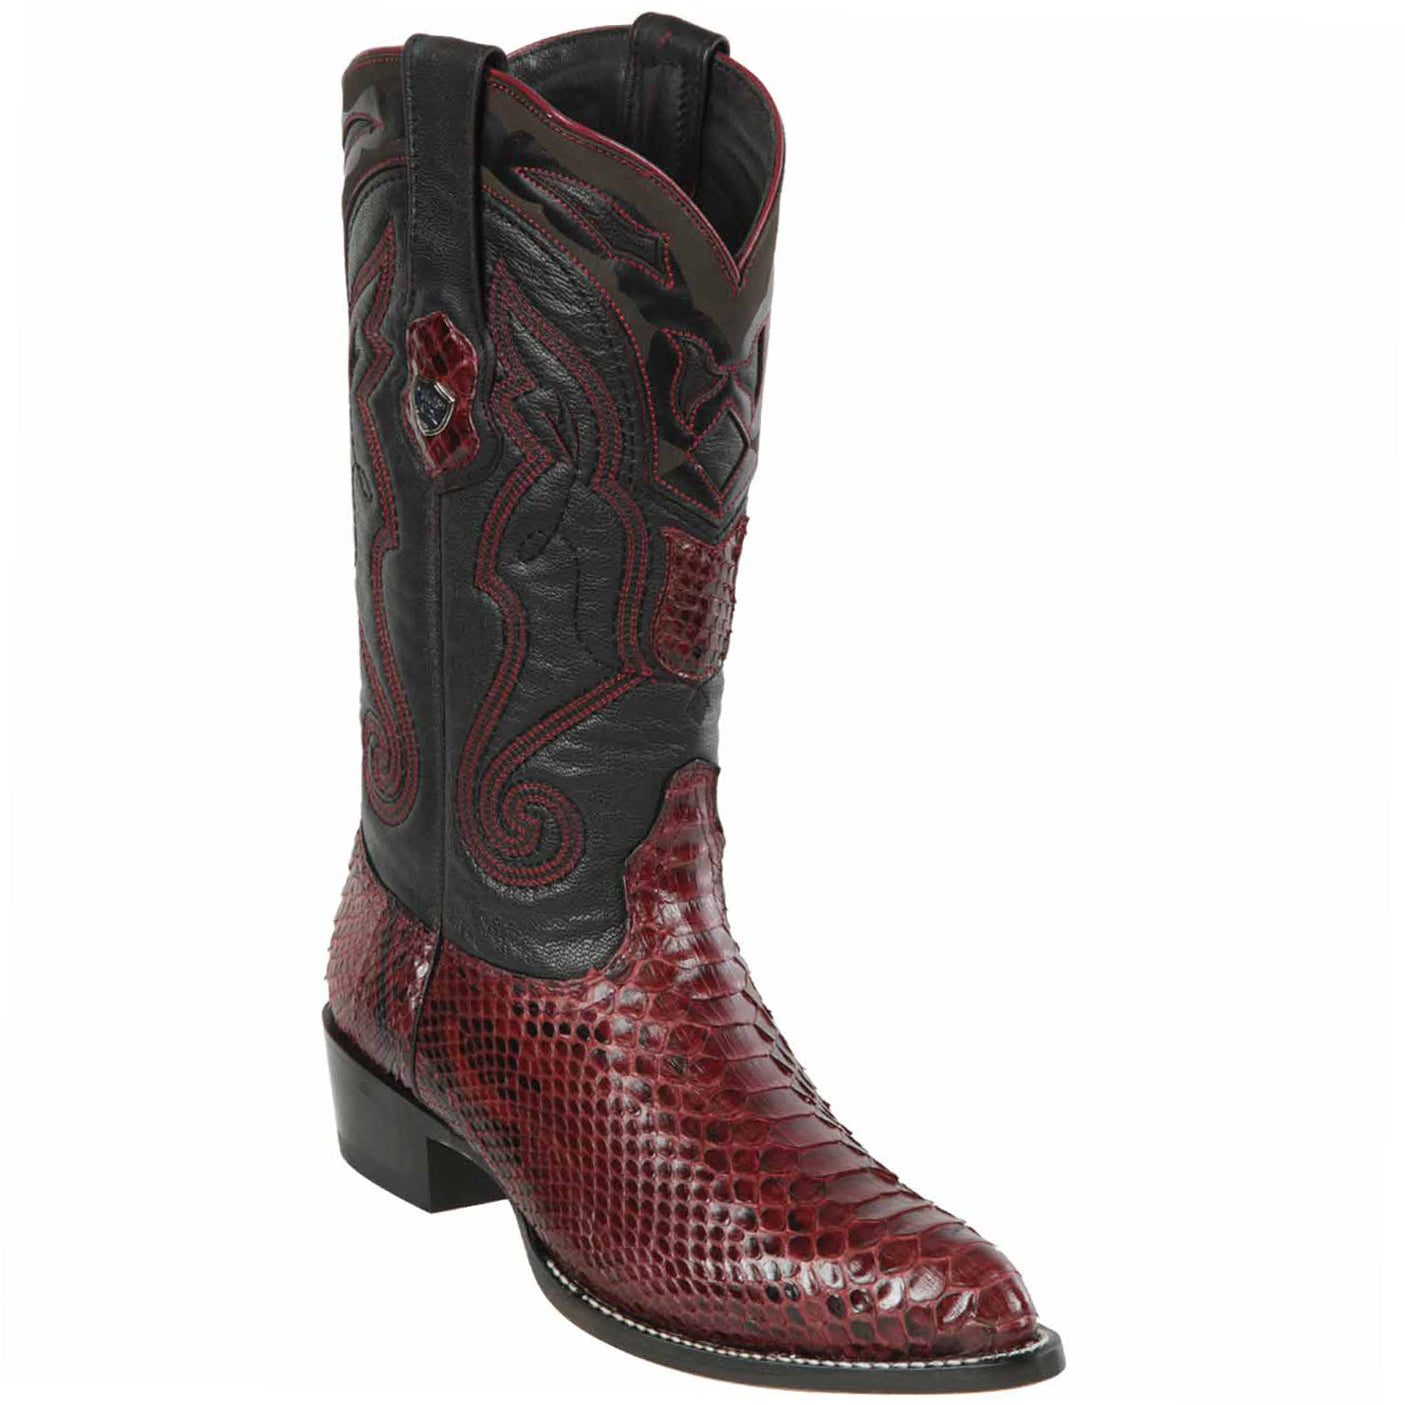 Wild West Boots - Brown Snakeskin Cowboy Boots J-Toe